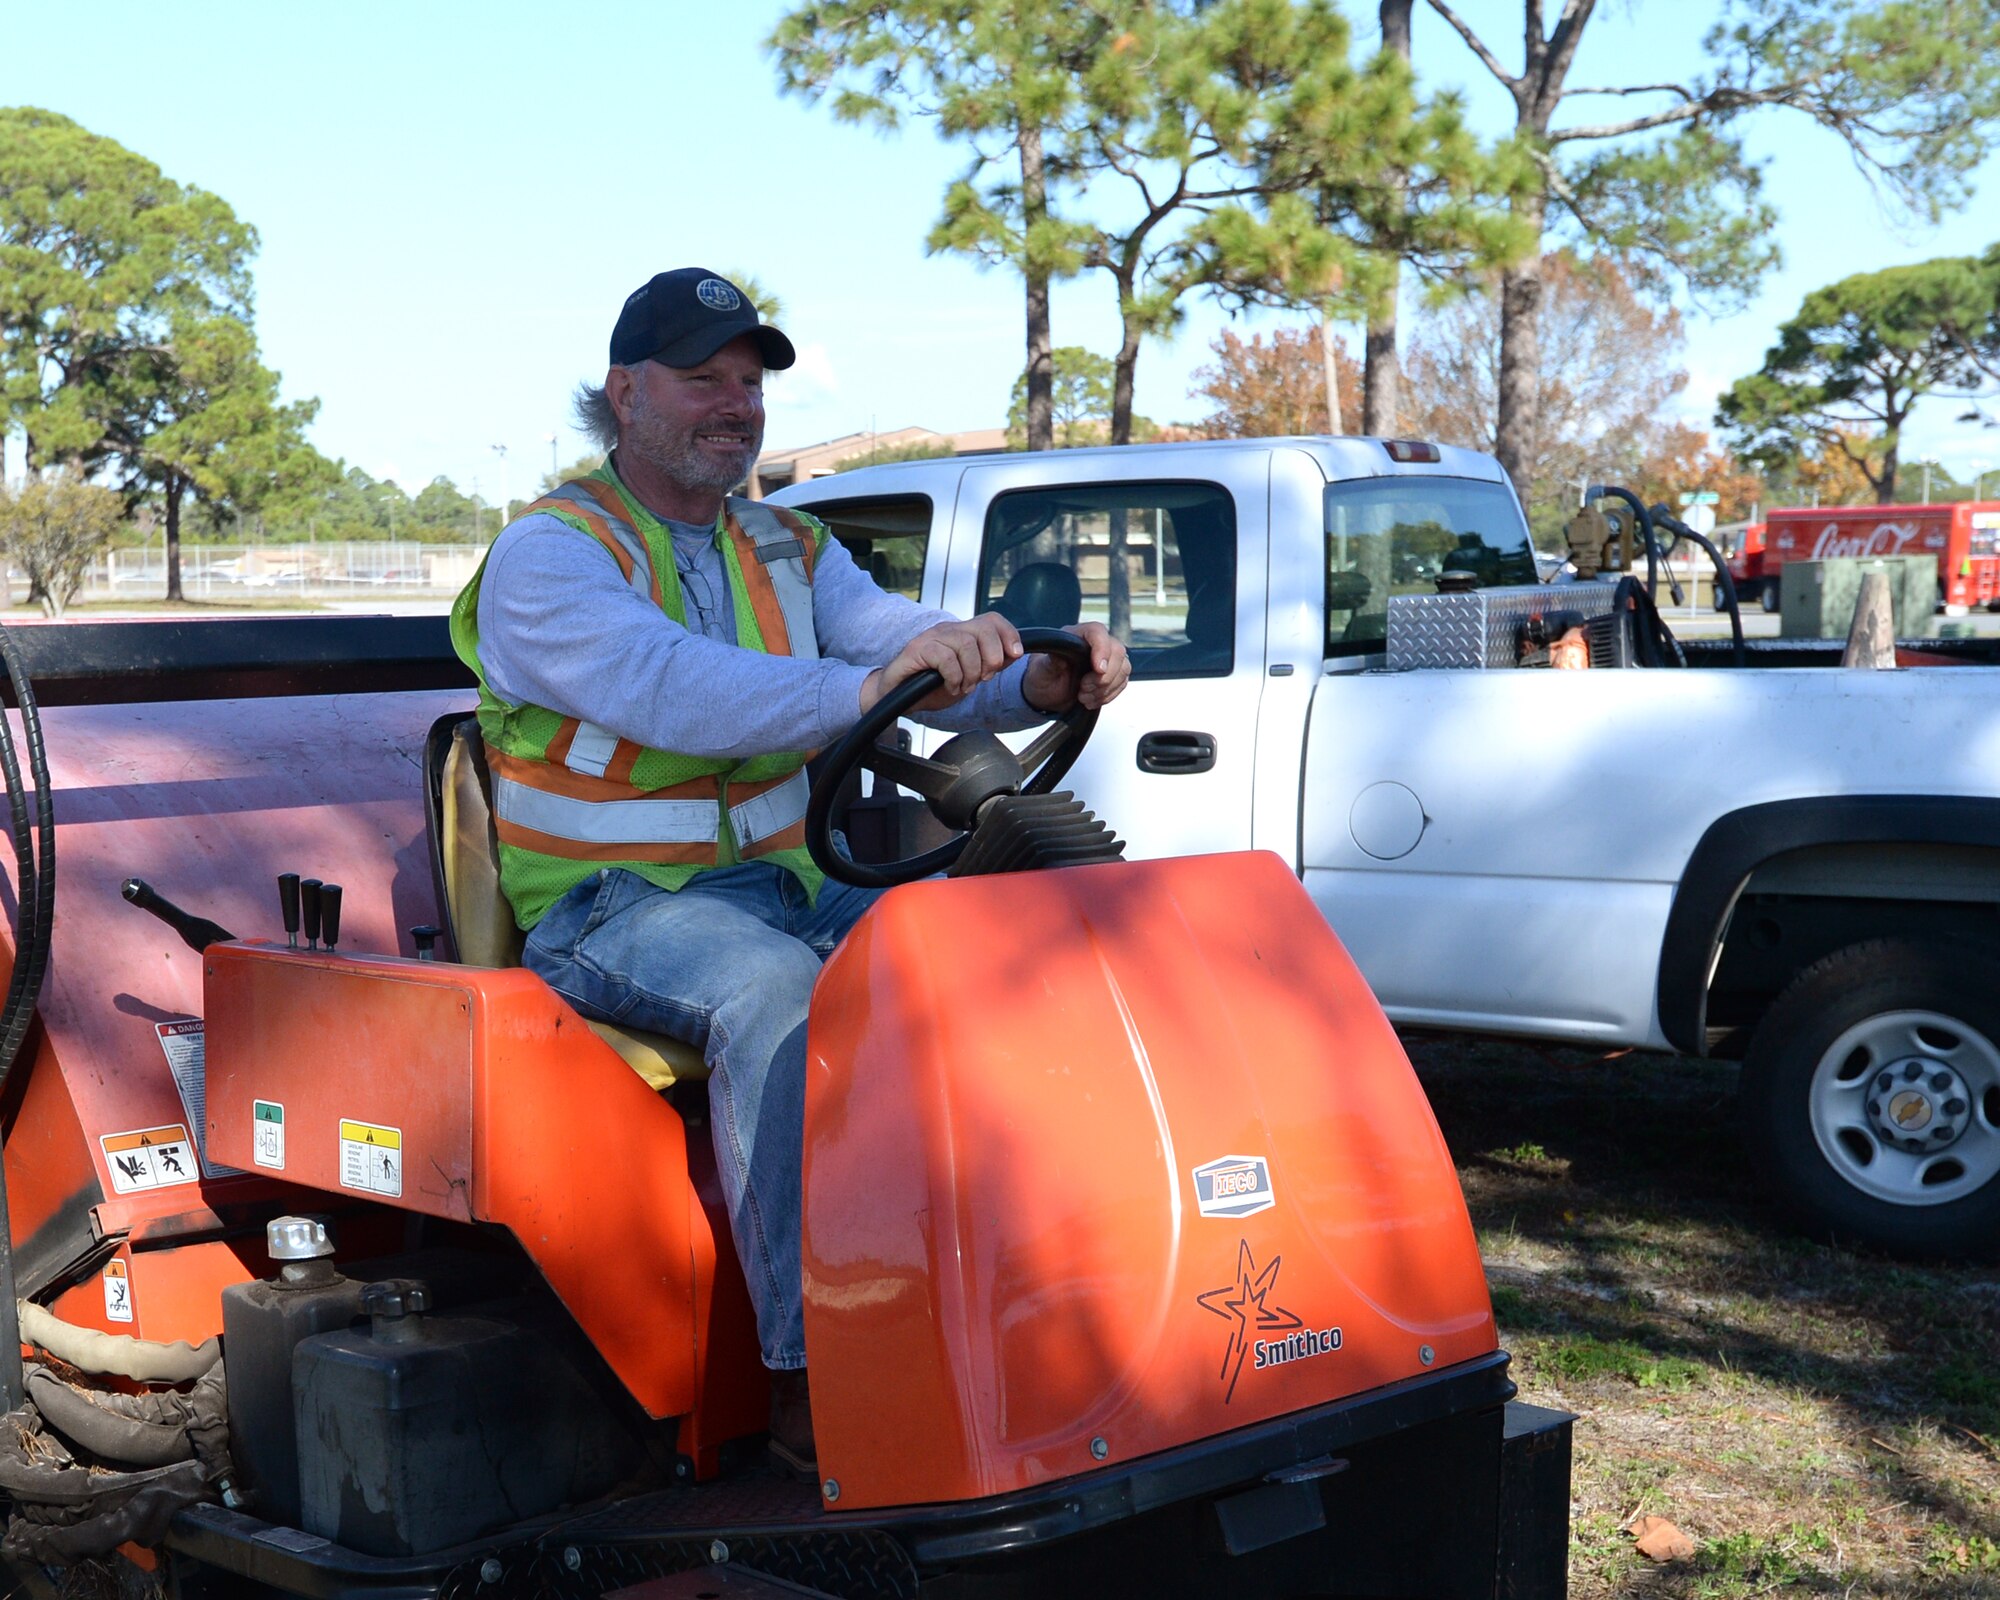 James Wobson, 325th Civil Engineering Squadron tractor operator, prepares to operate a landscaping mower.  The contractors that support the 325th CES play a vital role in keeping up the infrastructure of Tyndall AFB.  (U.S. Air Force photo by Airman 1st Class Cody R. Miller/Released)